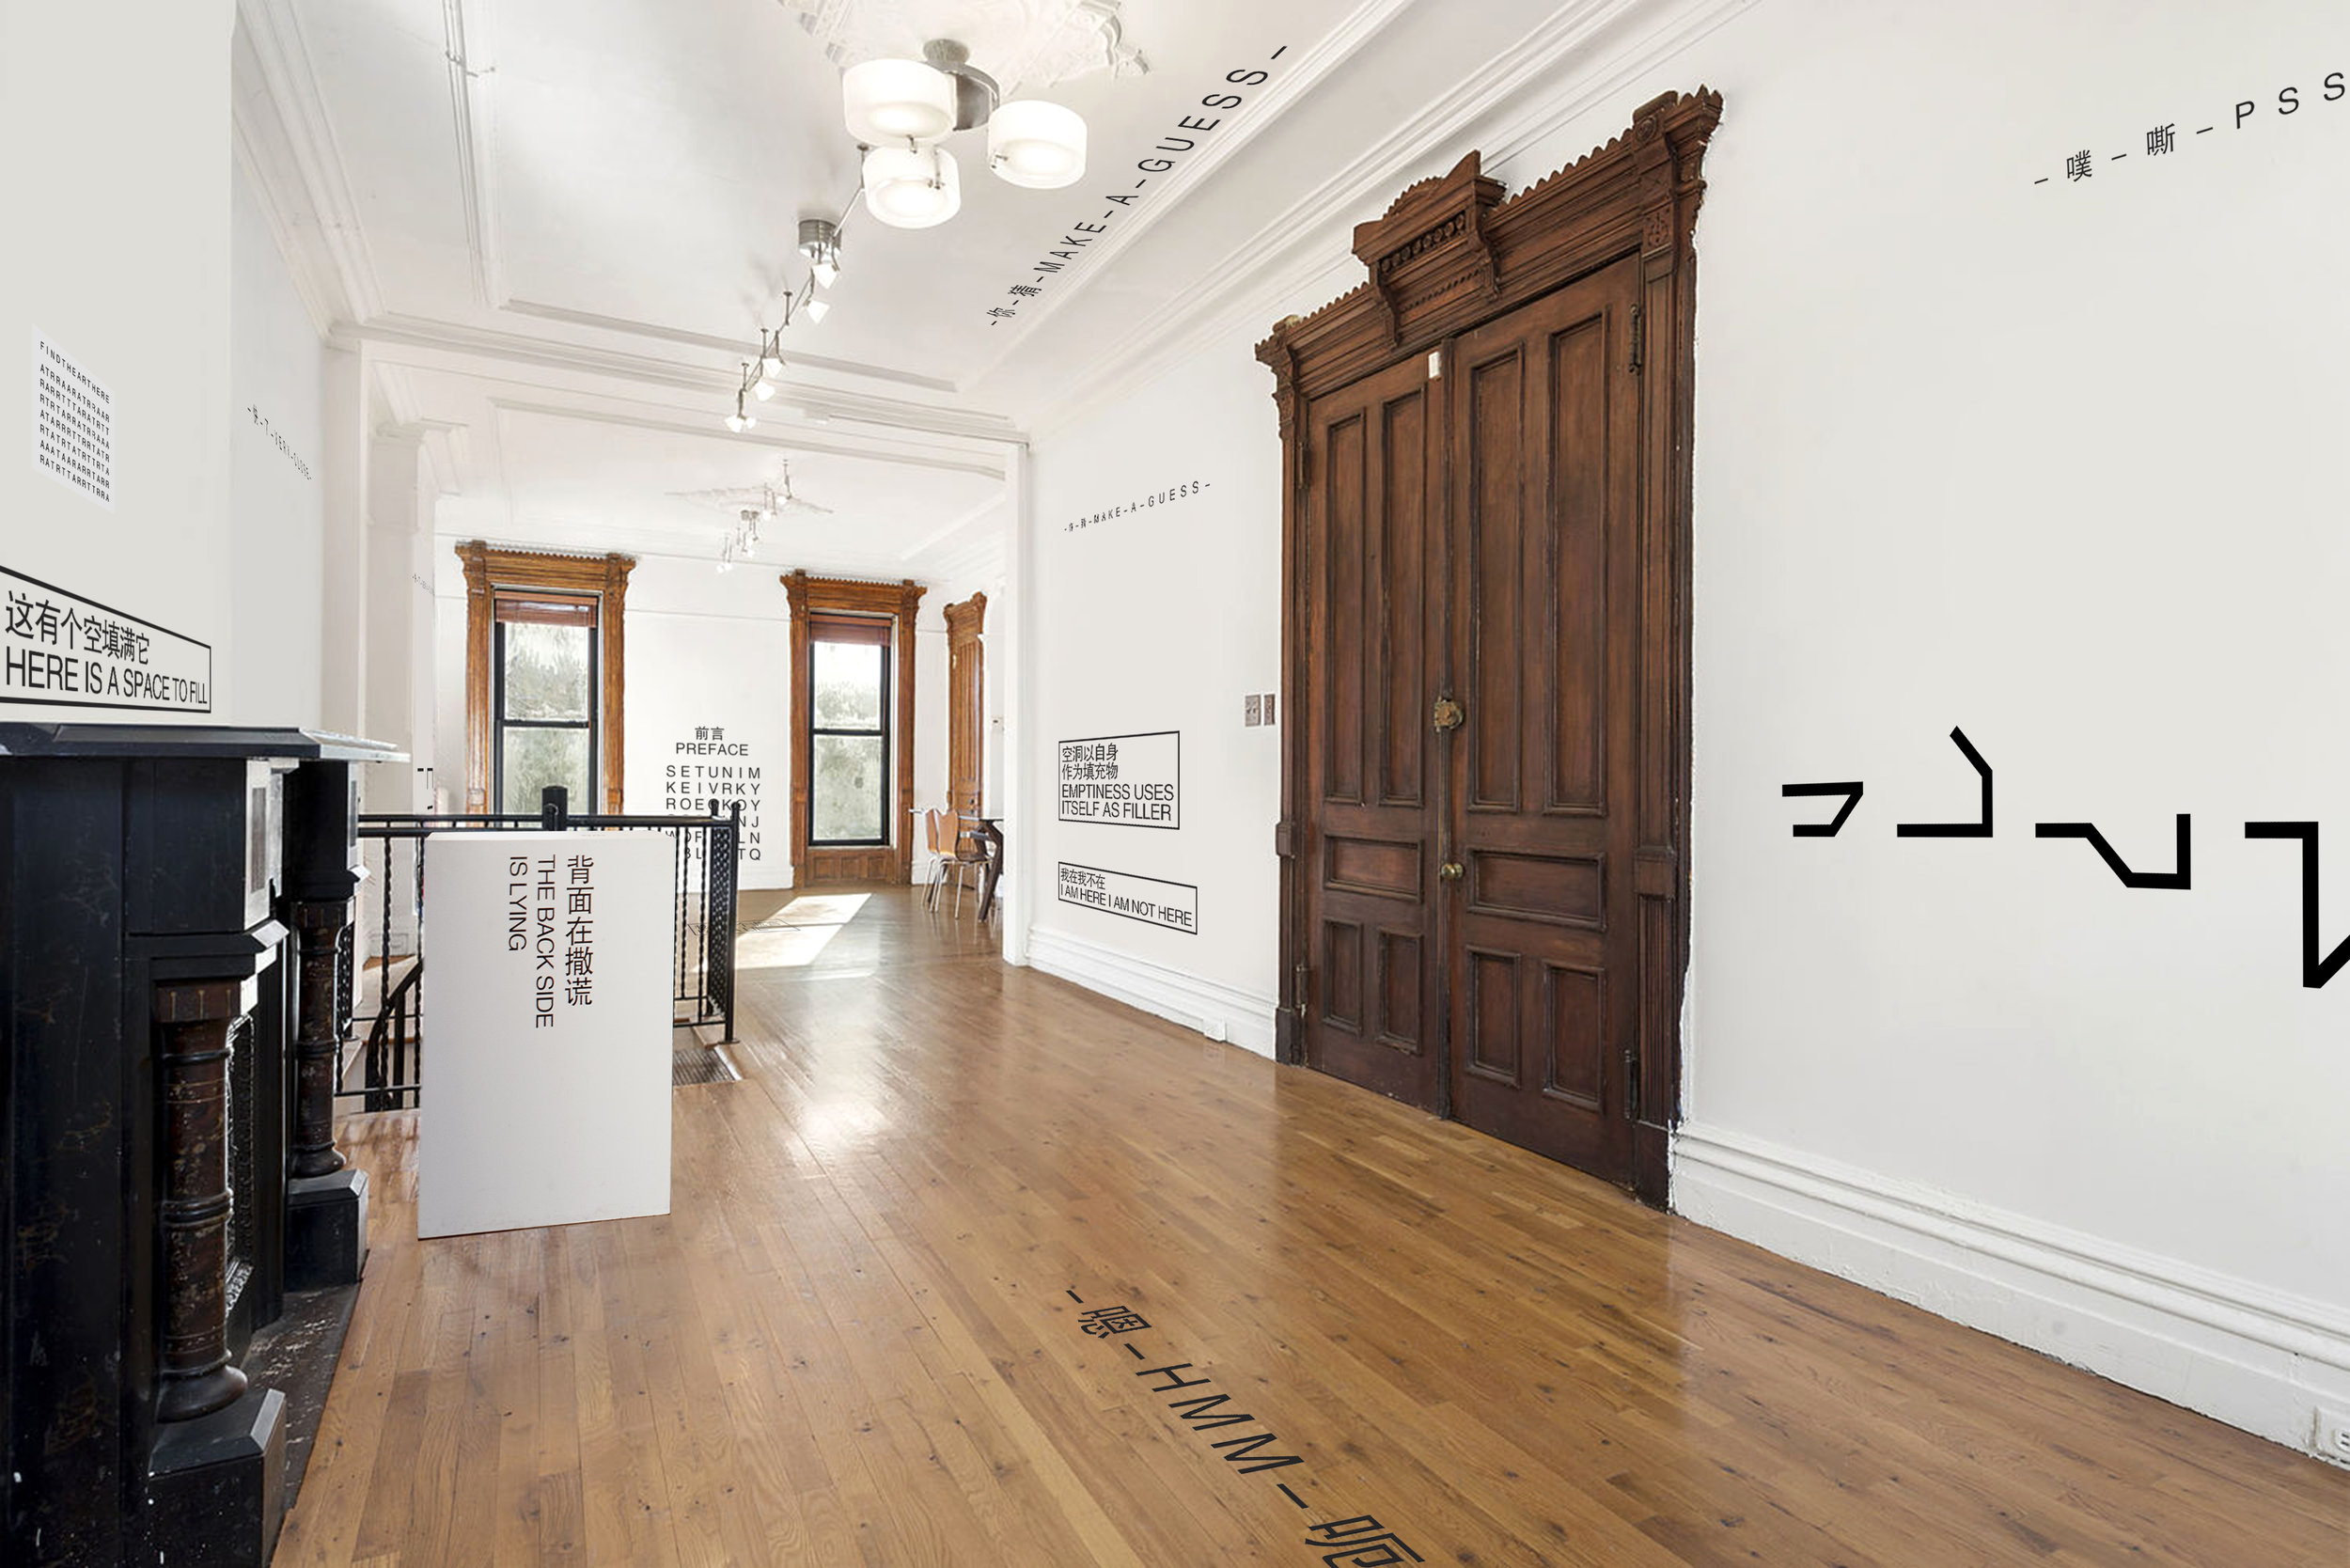   Qiao Wanwan: it Ends Now, Thanks for Attending  installation view. Photograph by Qiao Wanwan Studio, courtesy Fou Gallery. 